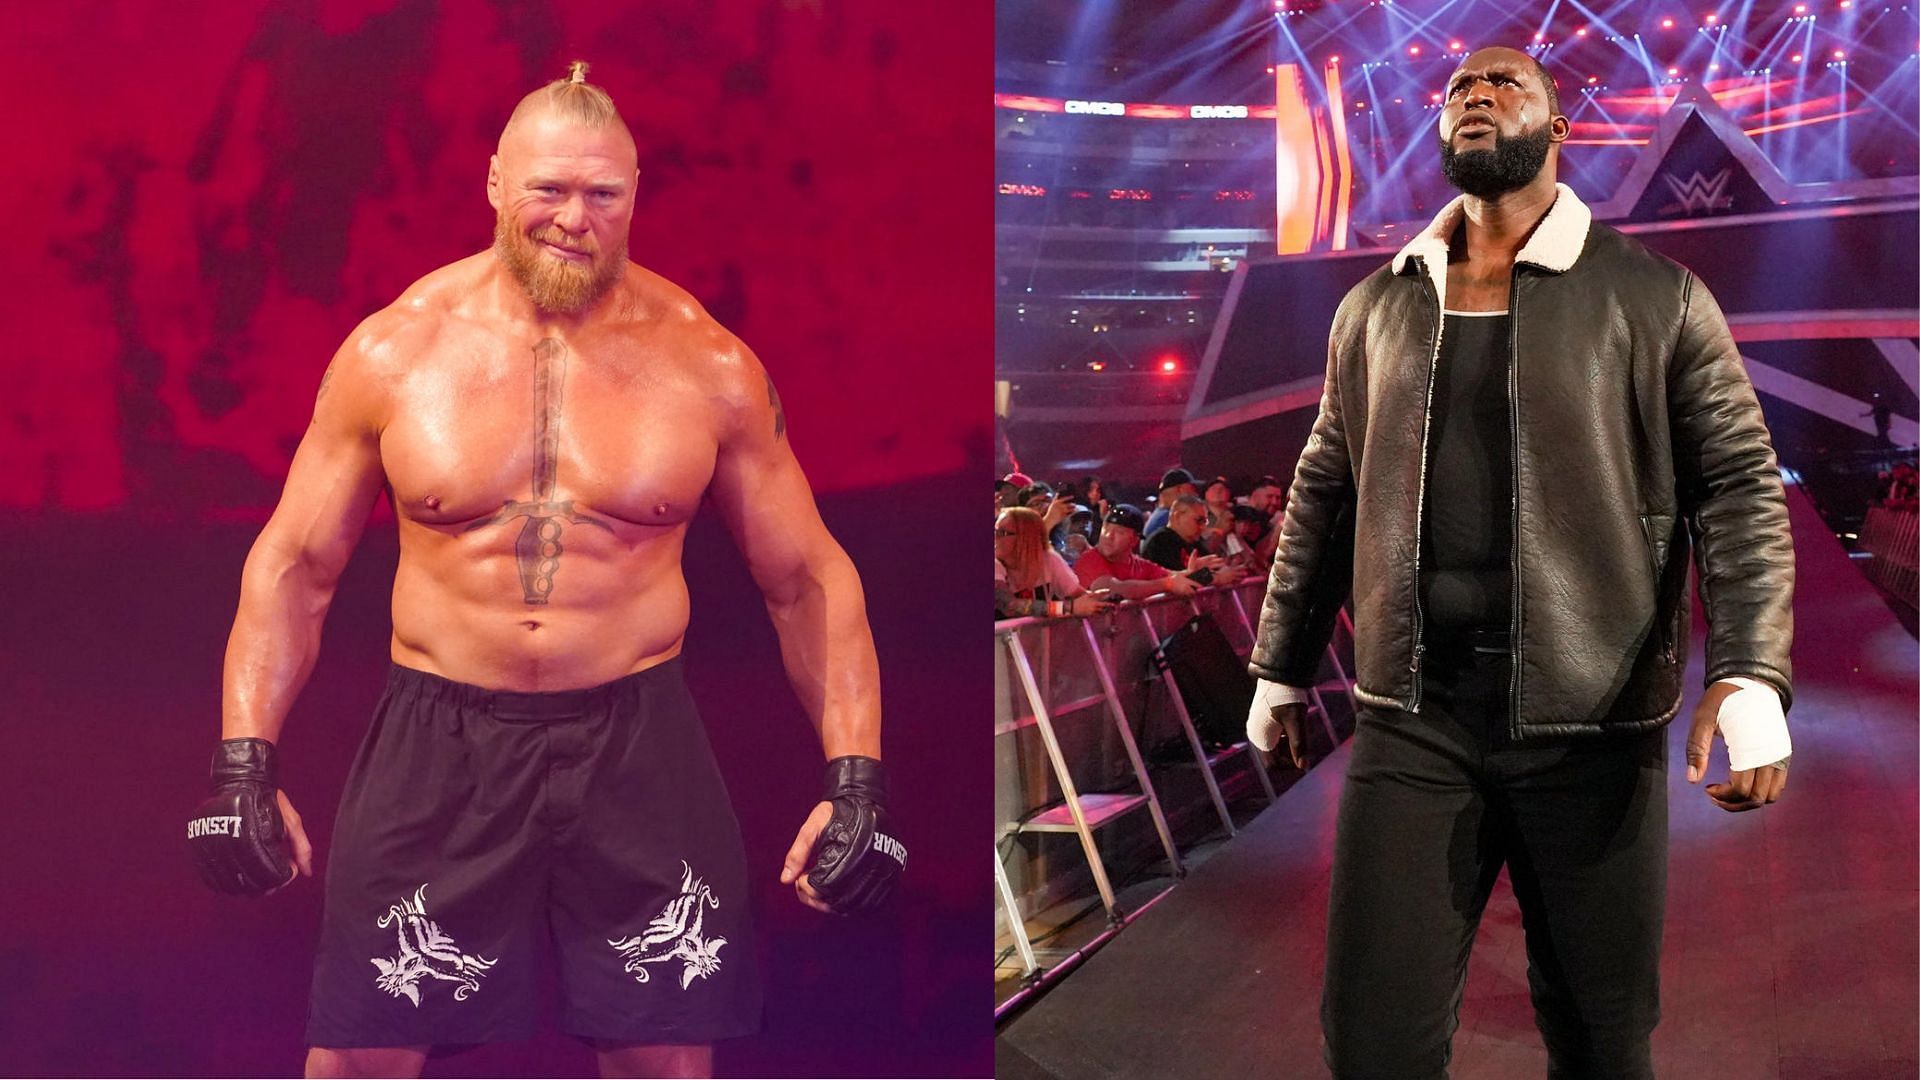 Are you excited for Brock Lesnar vs. Omos?